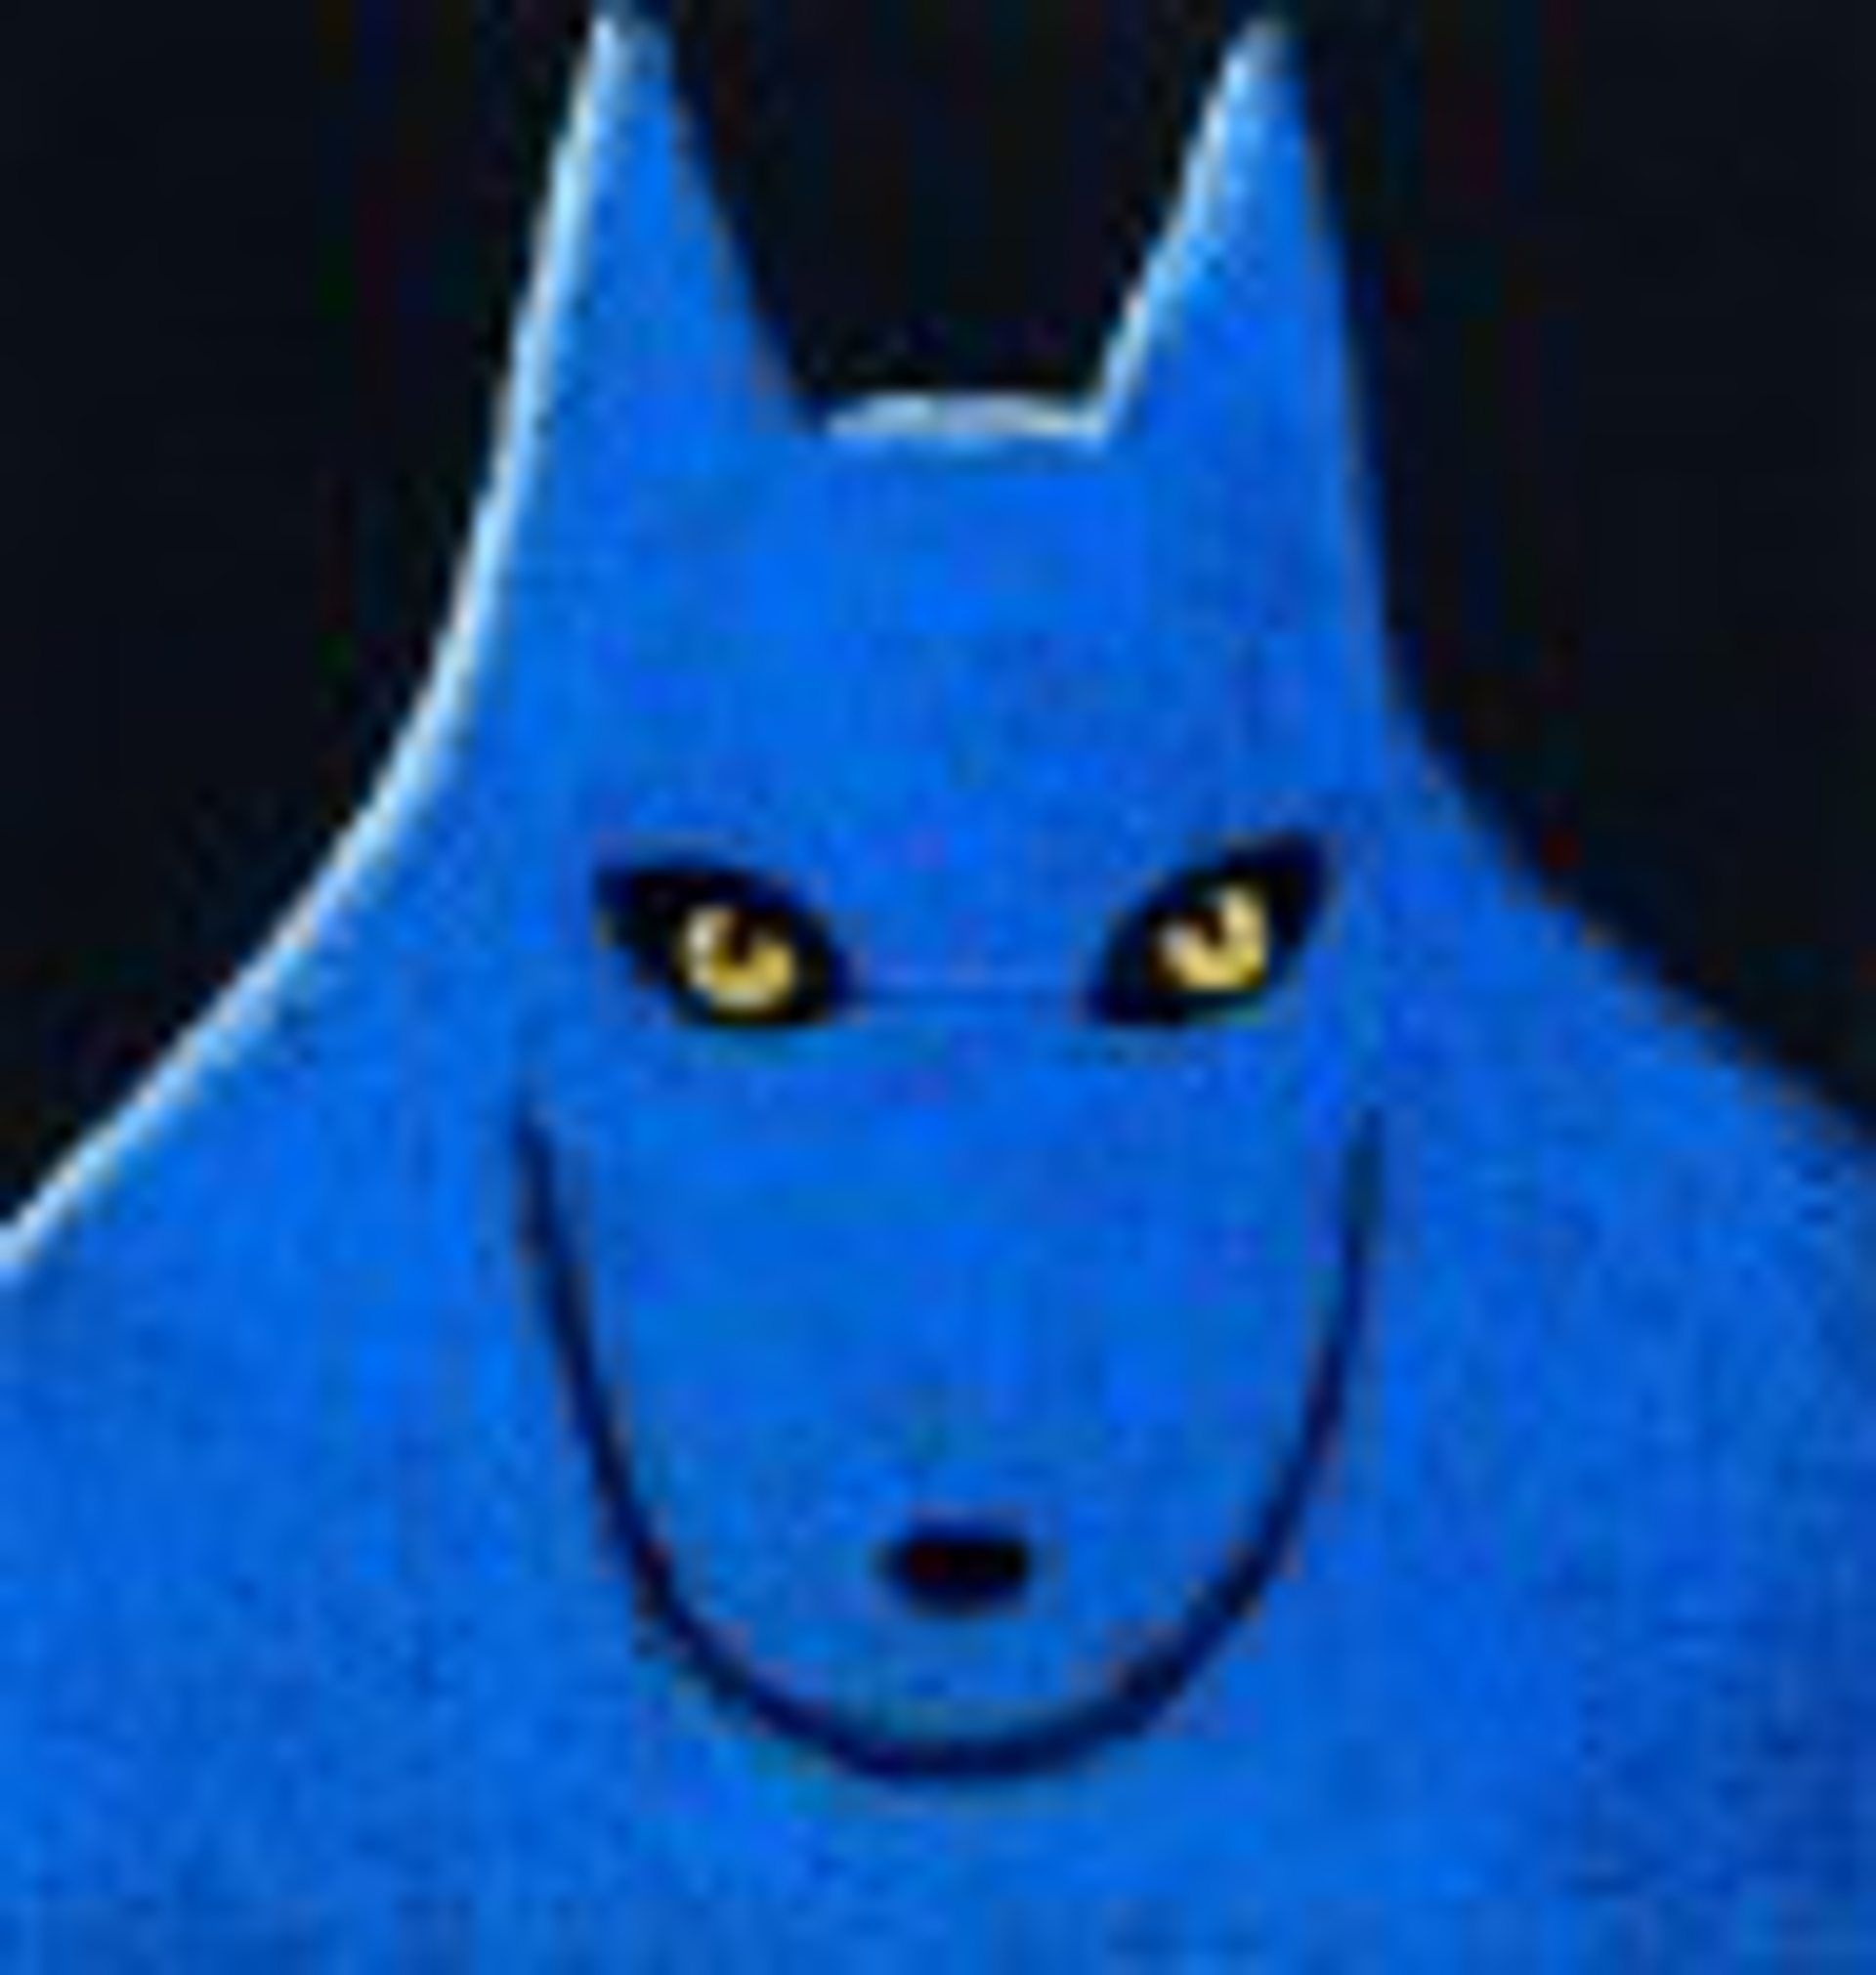 SINGLE BLUE WOLF - limited edition giclee on paper w/frame size of 21"x21" by Carole LaRoche